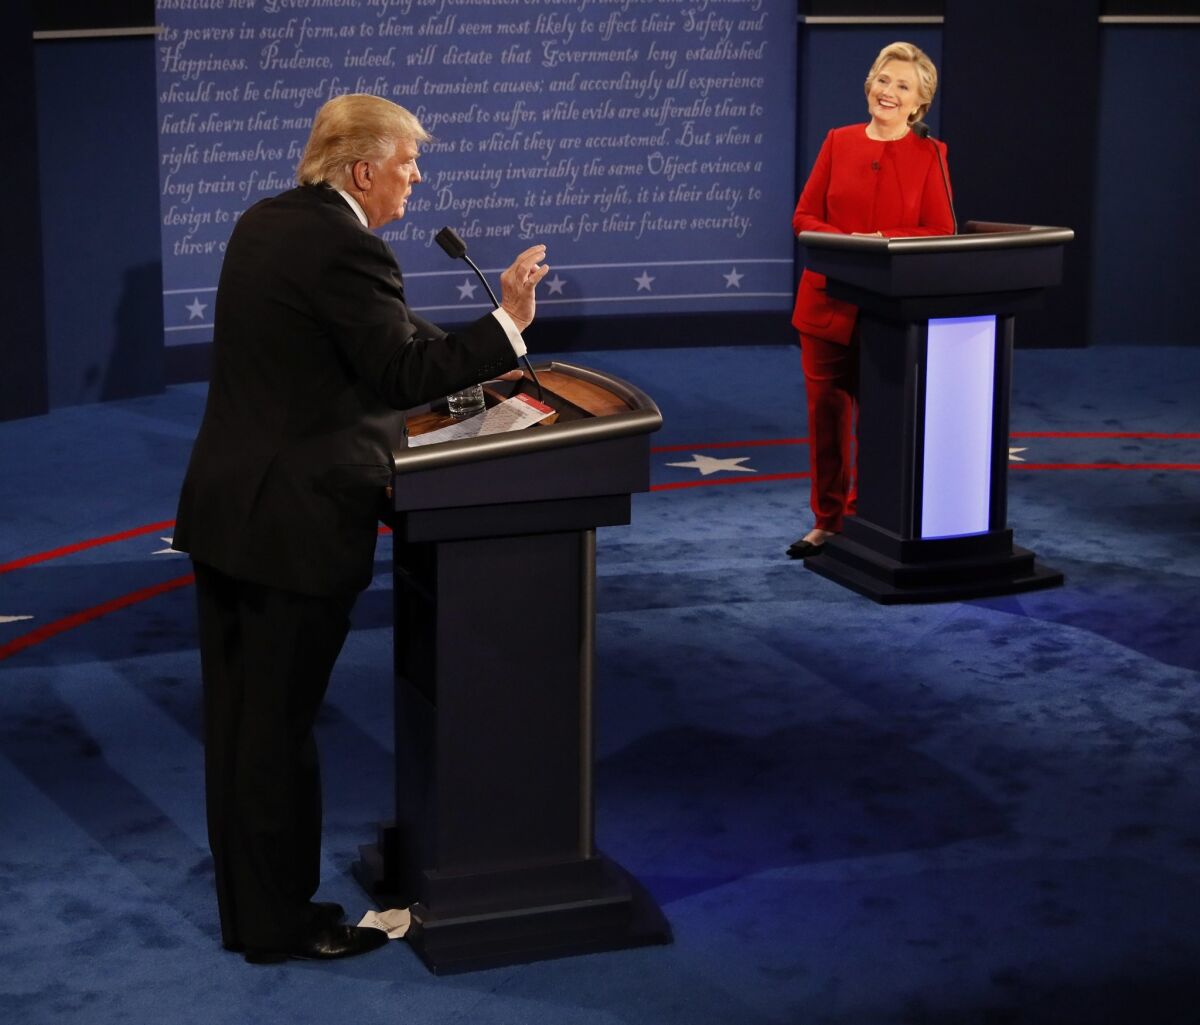 Republican Donald Trump and Democrat Hillary Clinton are seen during the presidential debate at Hofstra University.